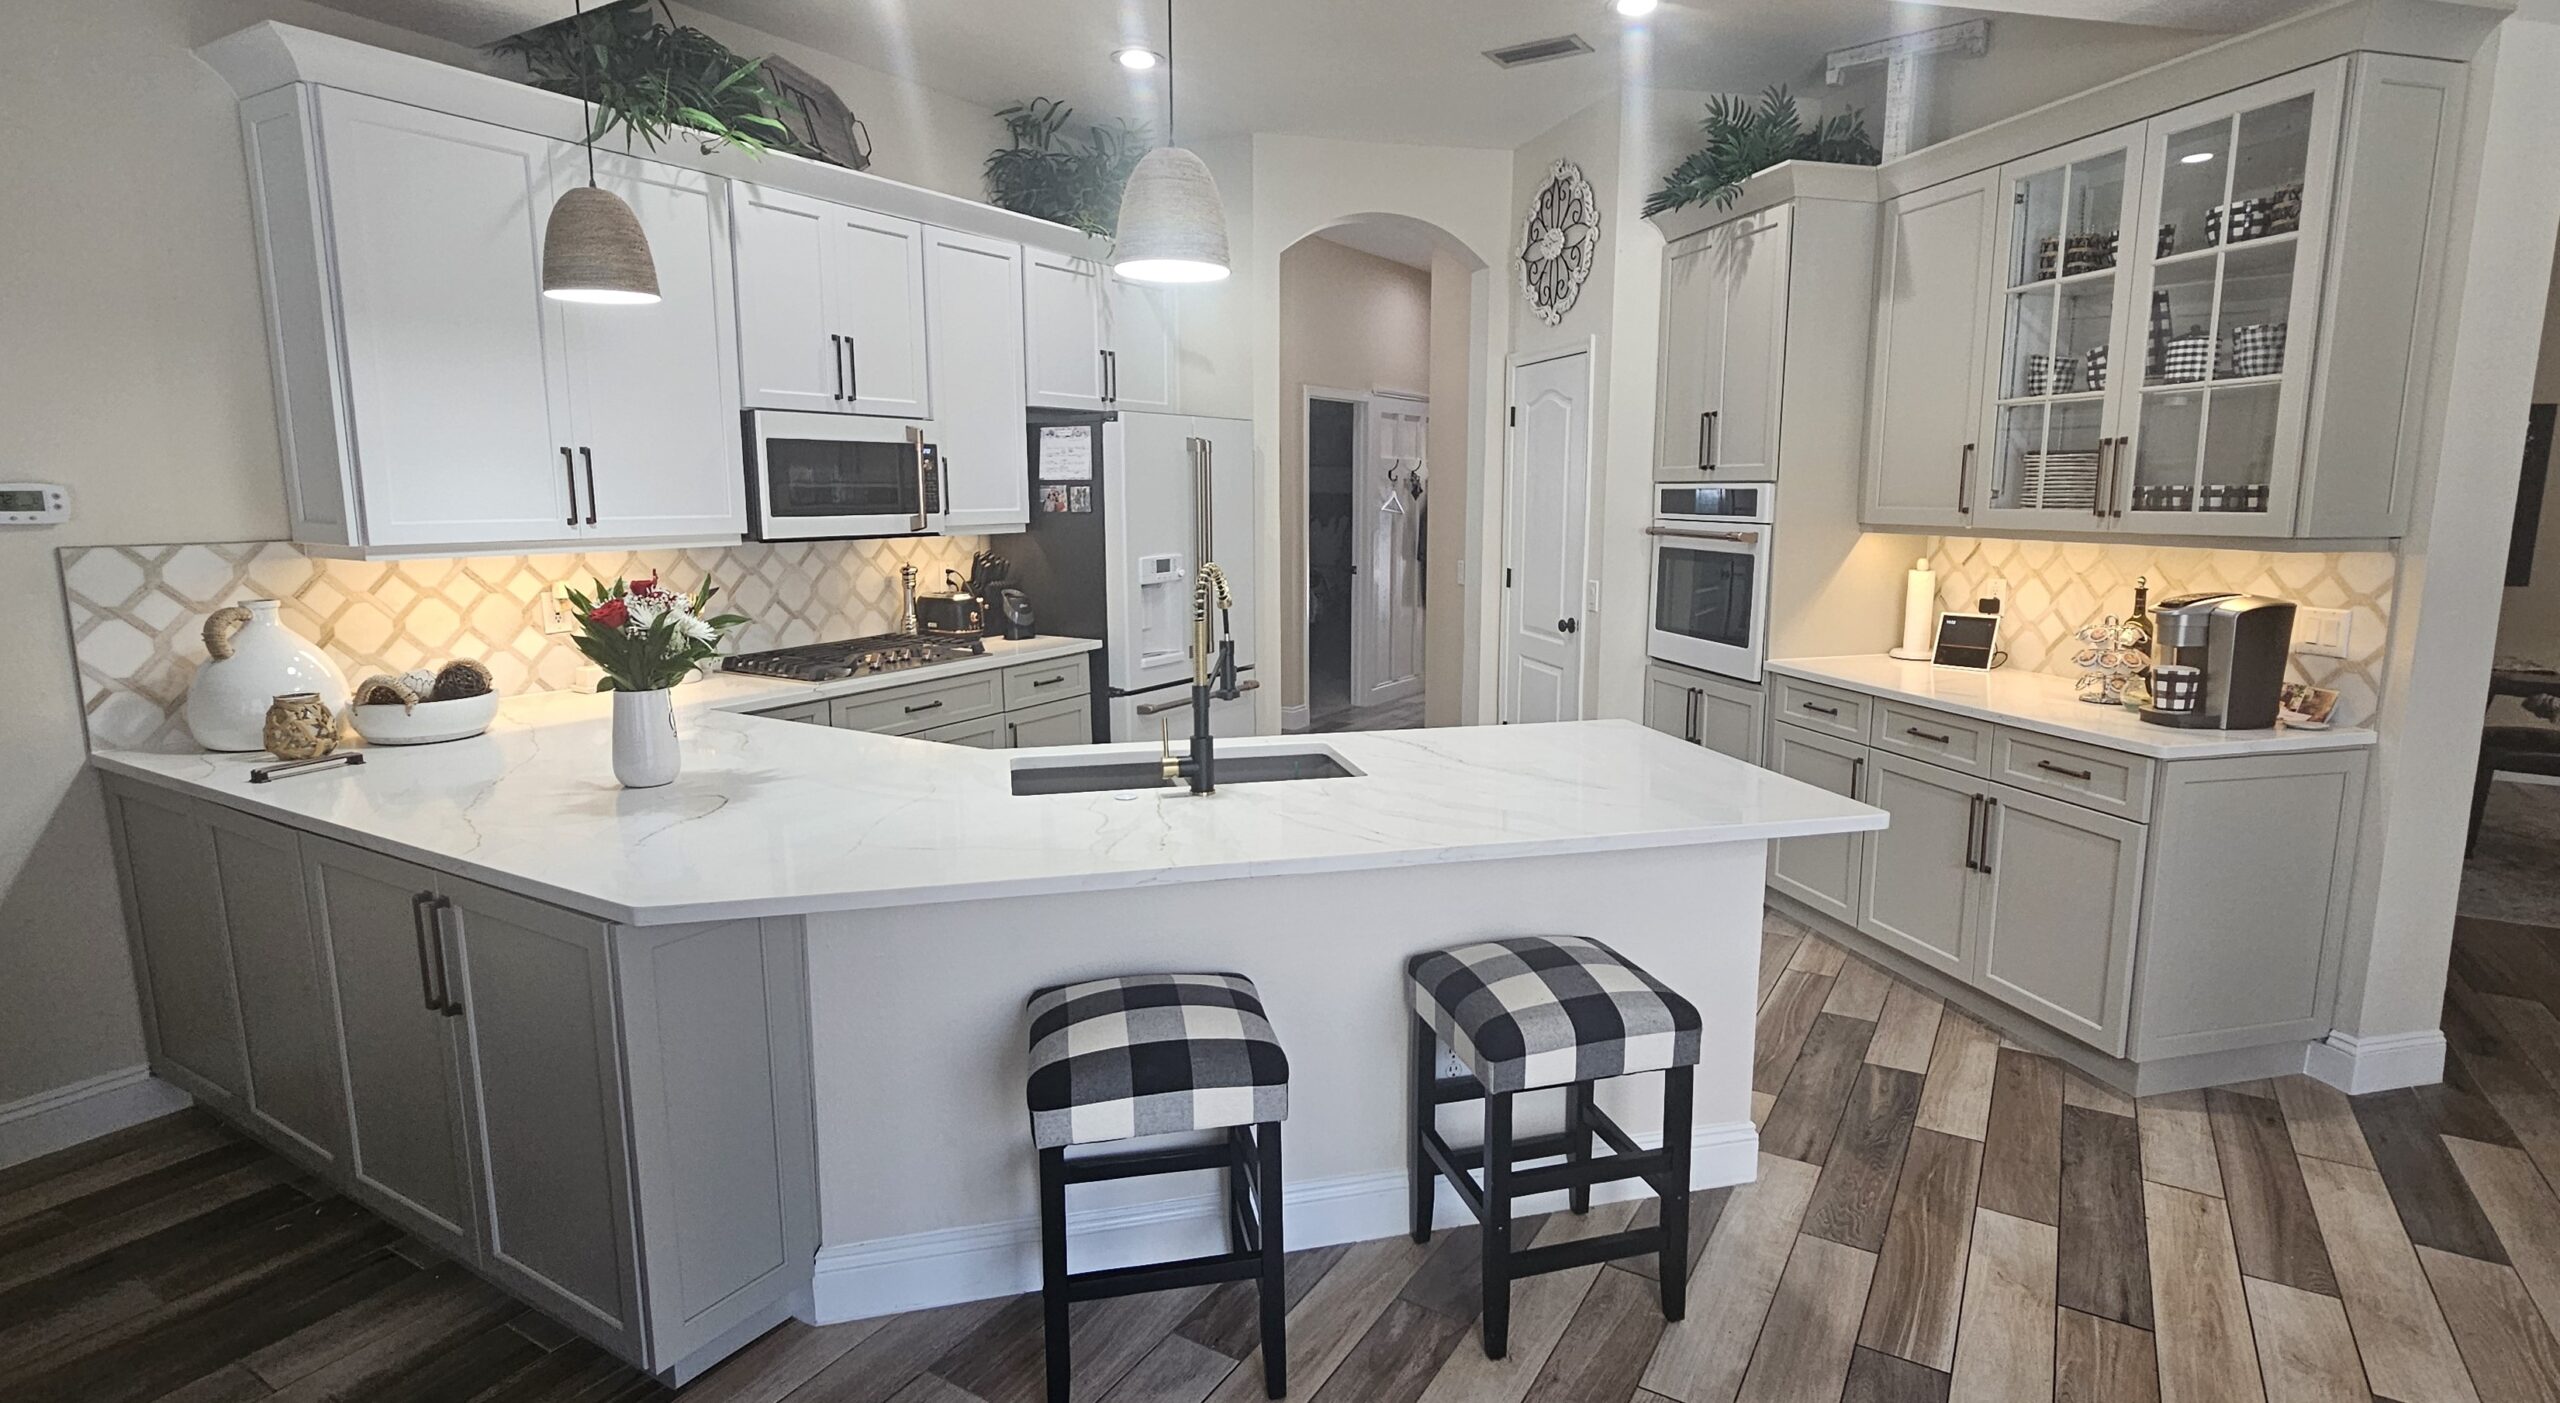 Modern appliances with a high-quality finish, granite worktops, and sleek white cabinet doors in Palm Harbor 